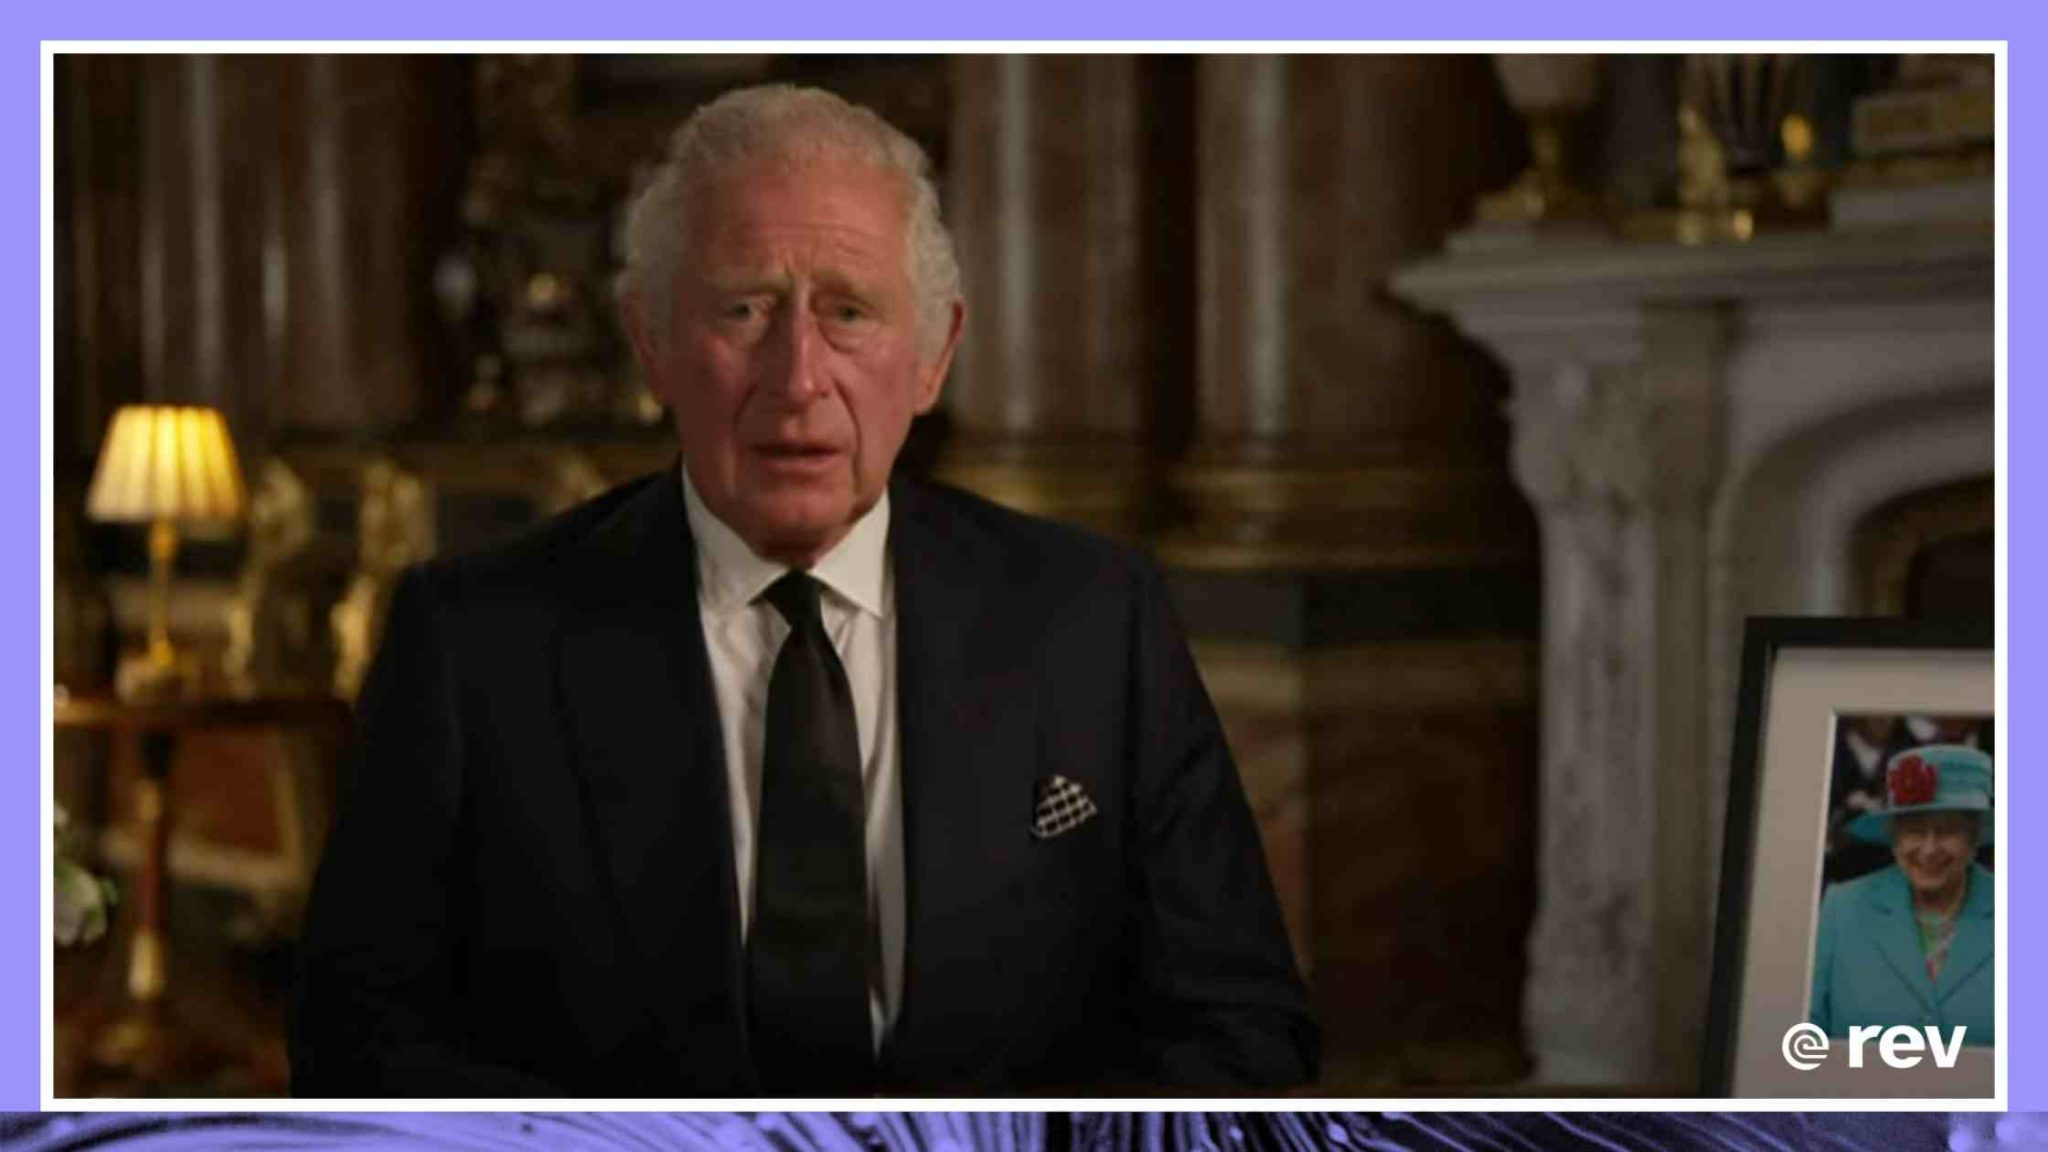 King Charles III gives 1st address to Britain and the Commonwealth as new monarch Transcript